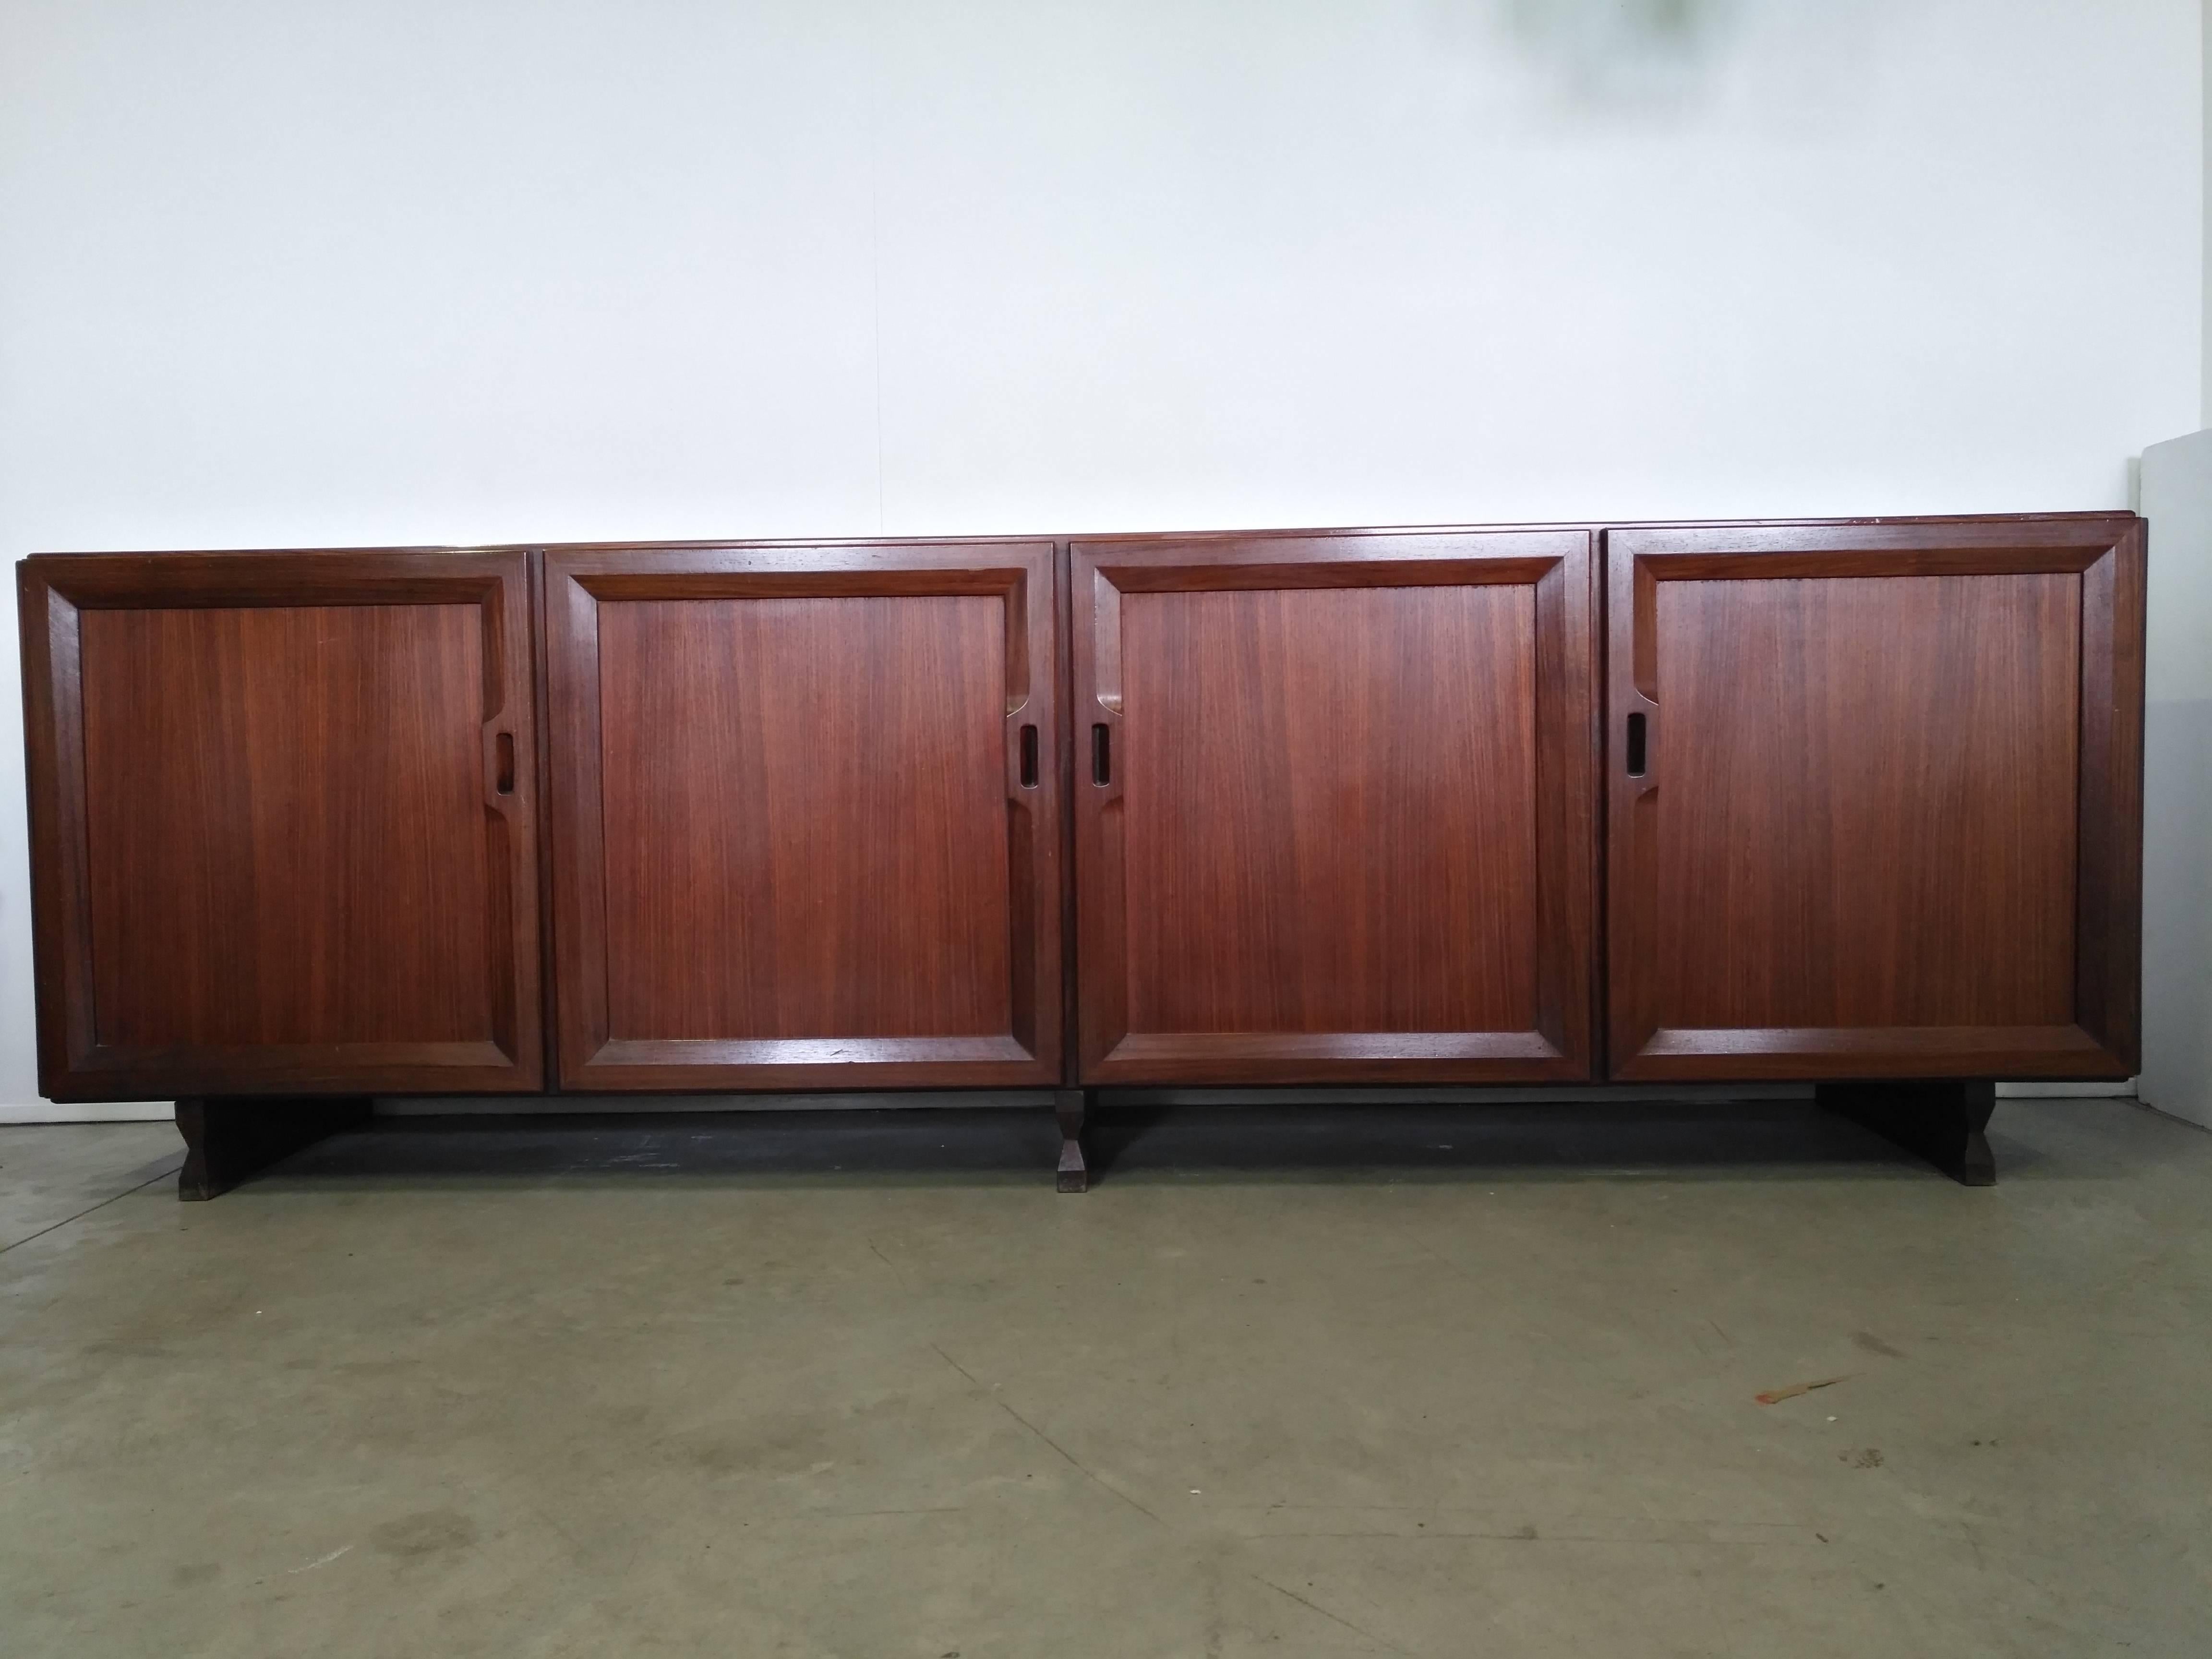 Beautiful sideboard four doors, mahogany wood, designed by Franco Albini in 1957 and manufactured by Poggi this credenza is called ‘MB15’. 
Original in all parts is very elegant and modern style even if was made in the 1950s, really an icon of the